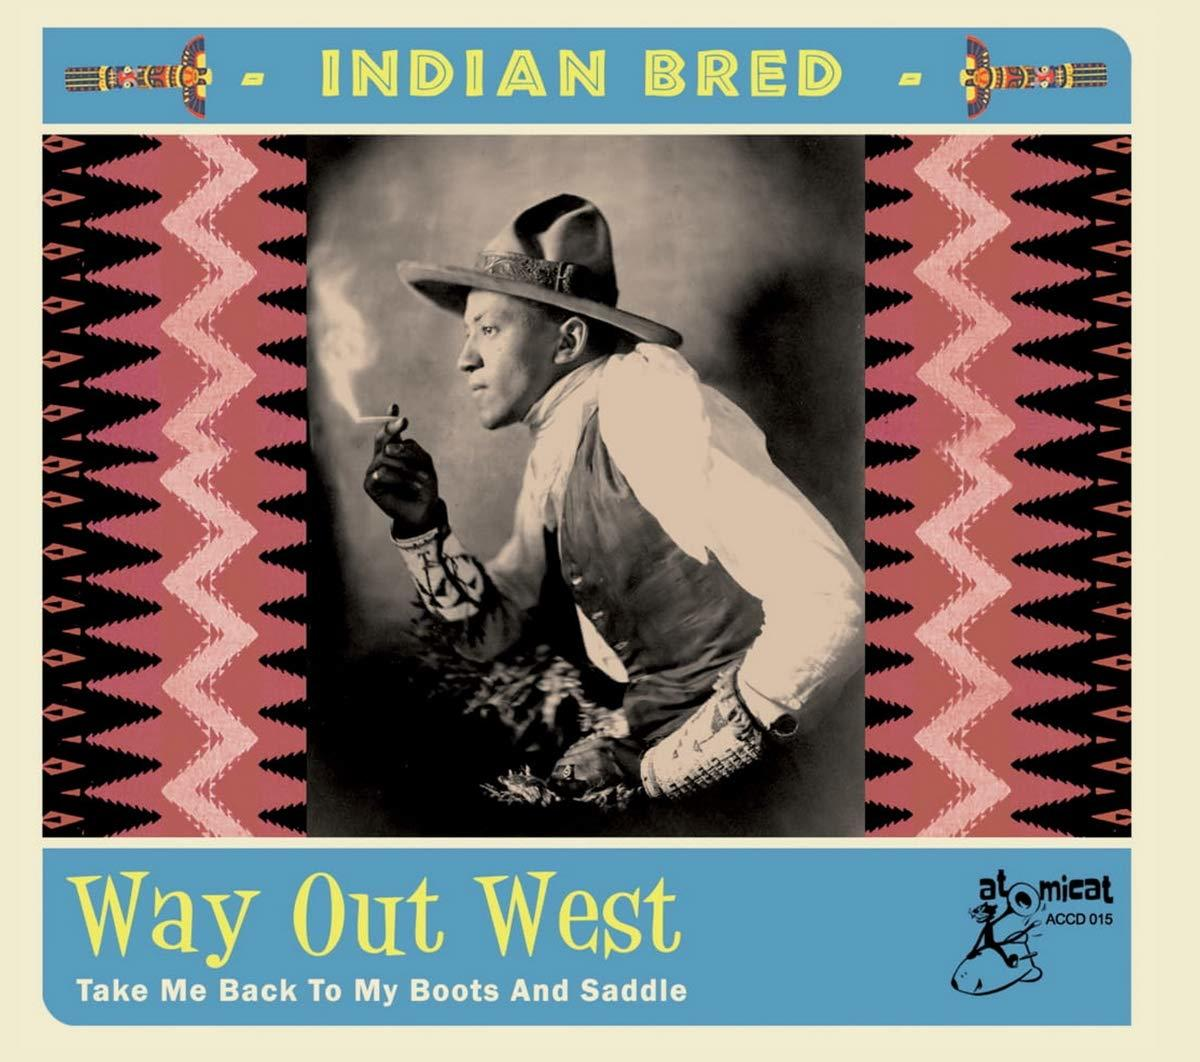 VARIOUS - Indian Bred-Way Out - West (CD)